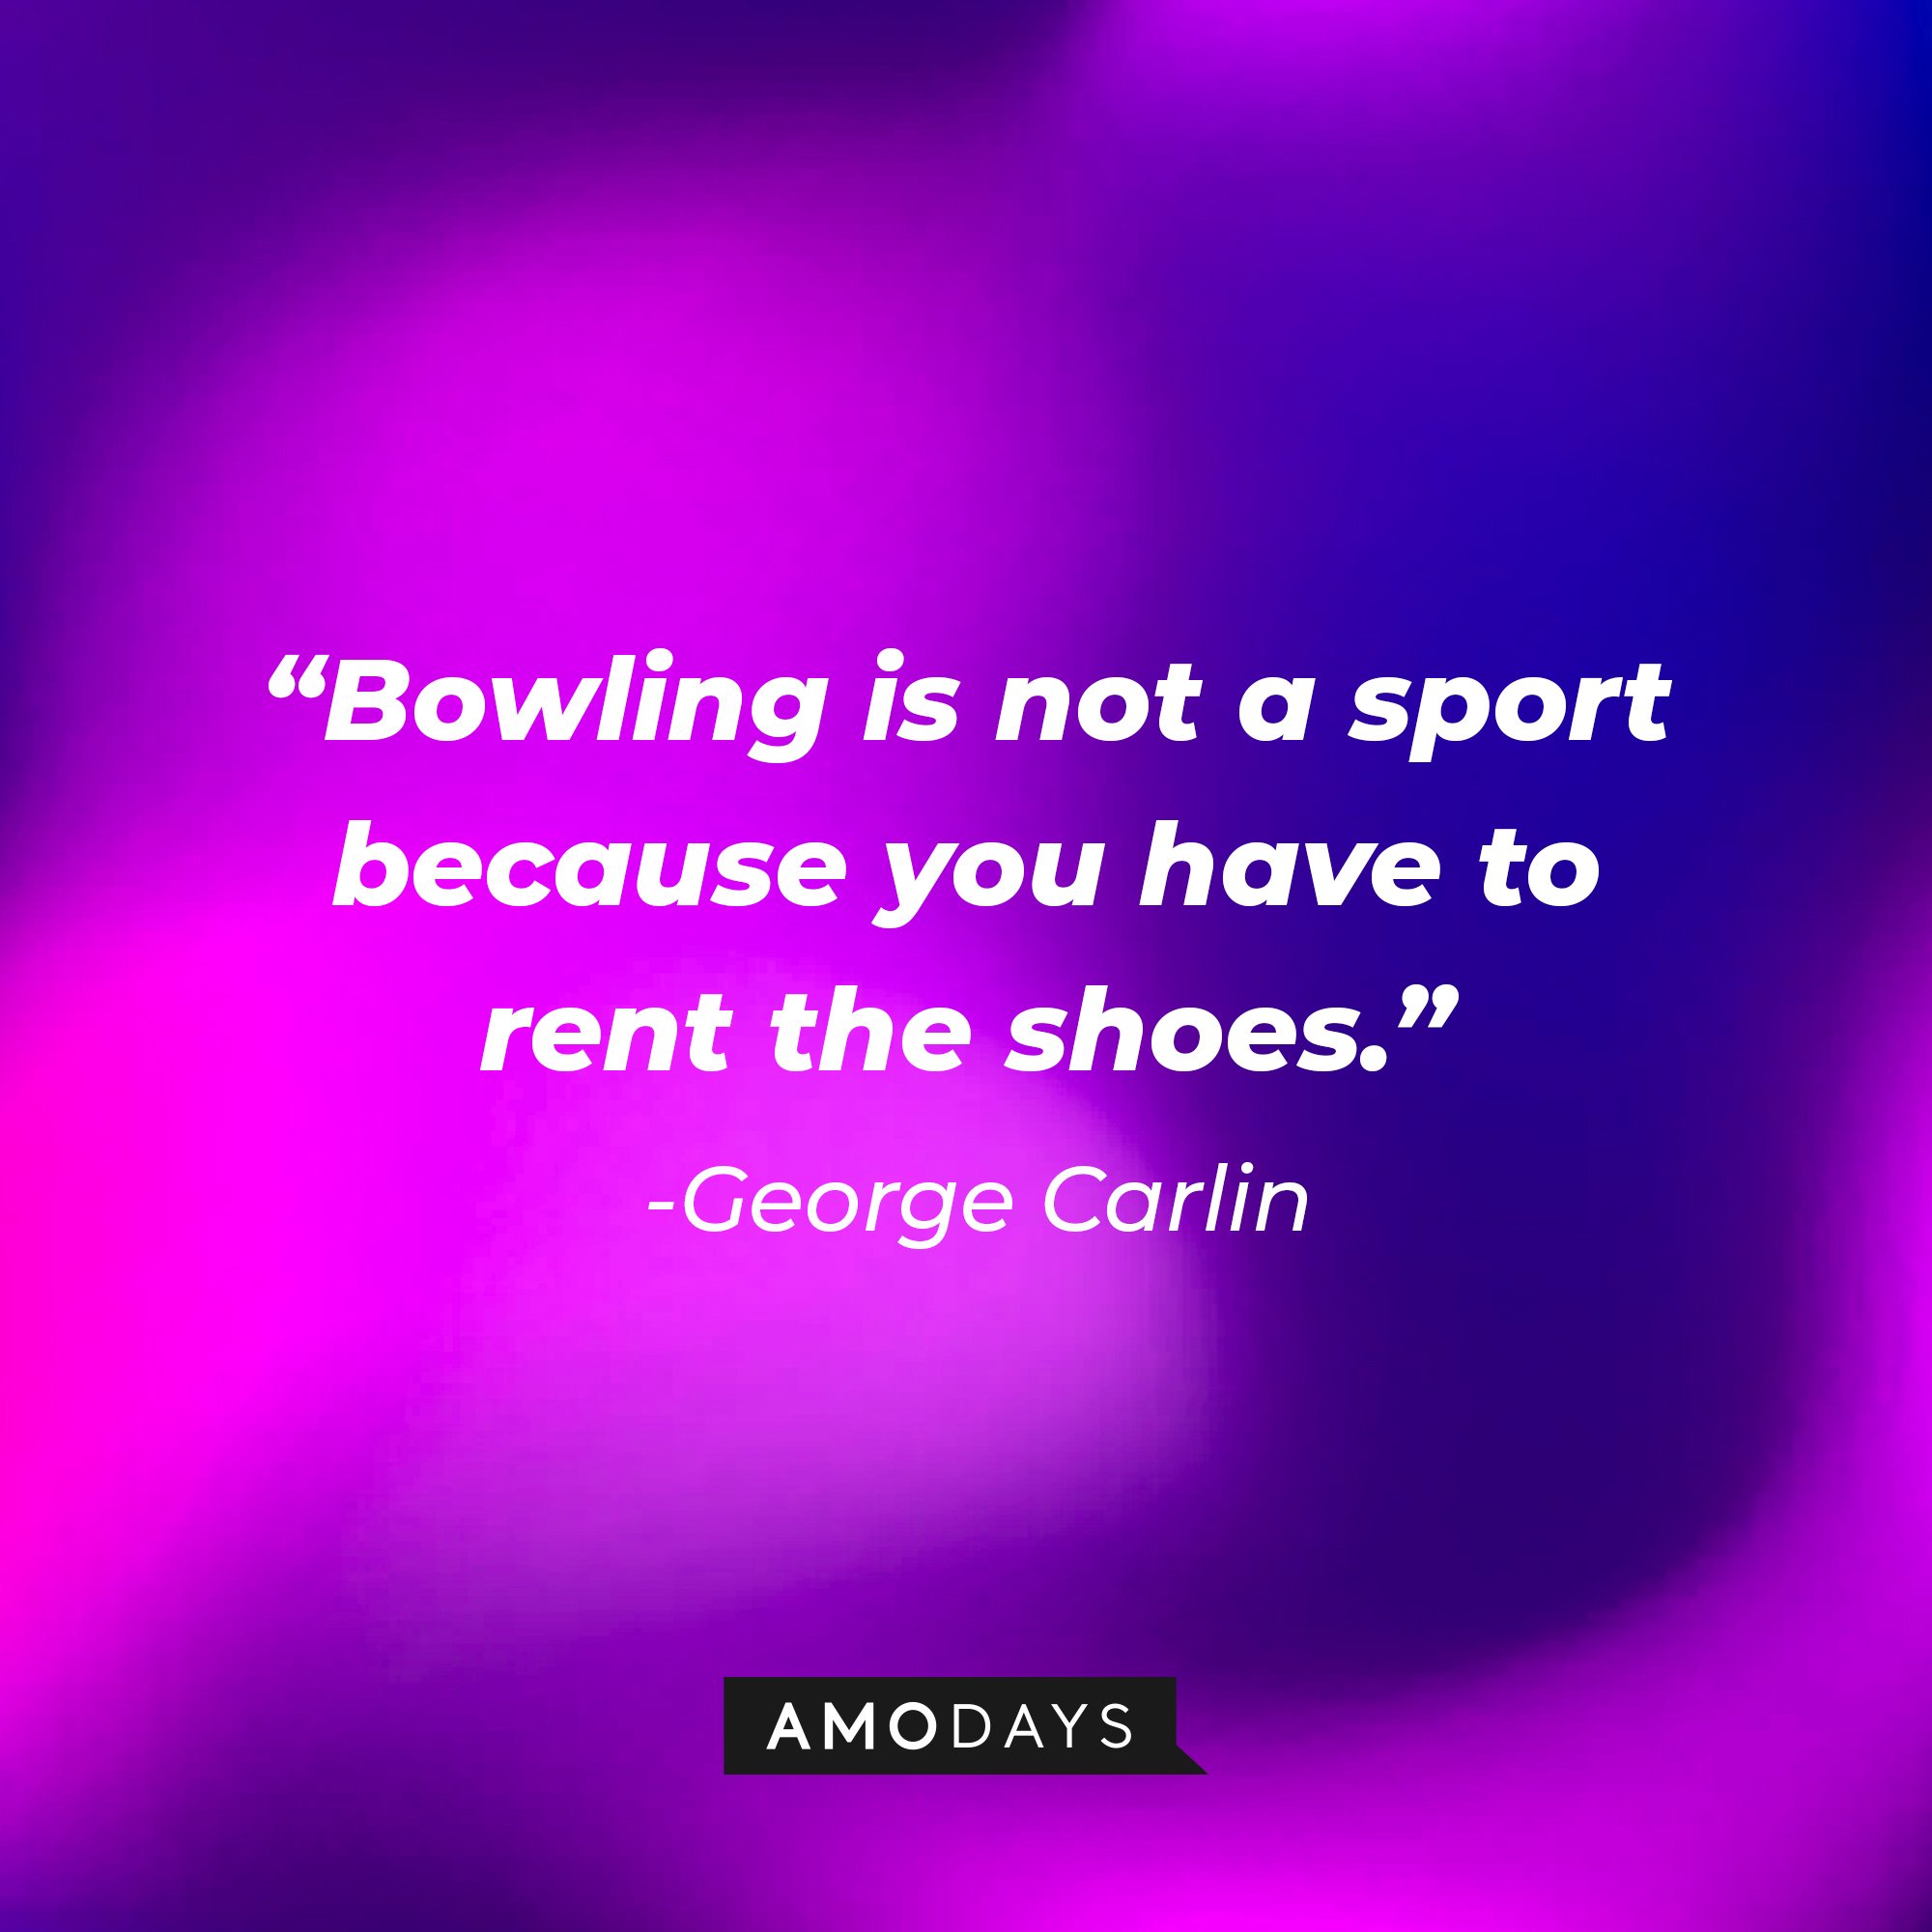 George Carlin's quote: "Bowling is not a sport because you have to rent the shoes."| Image: AmoDays